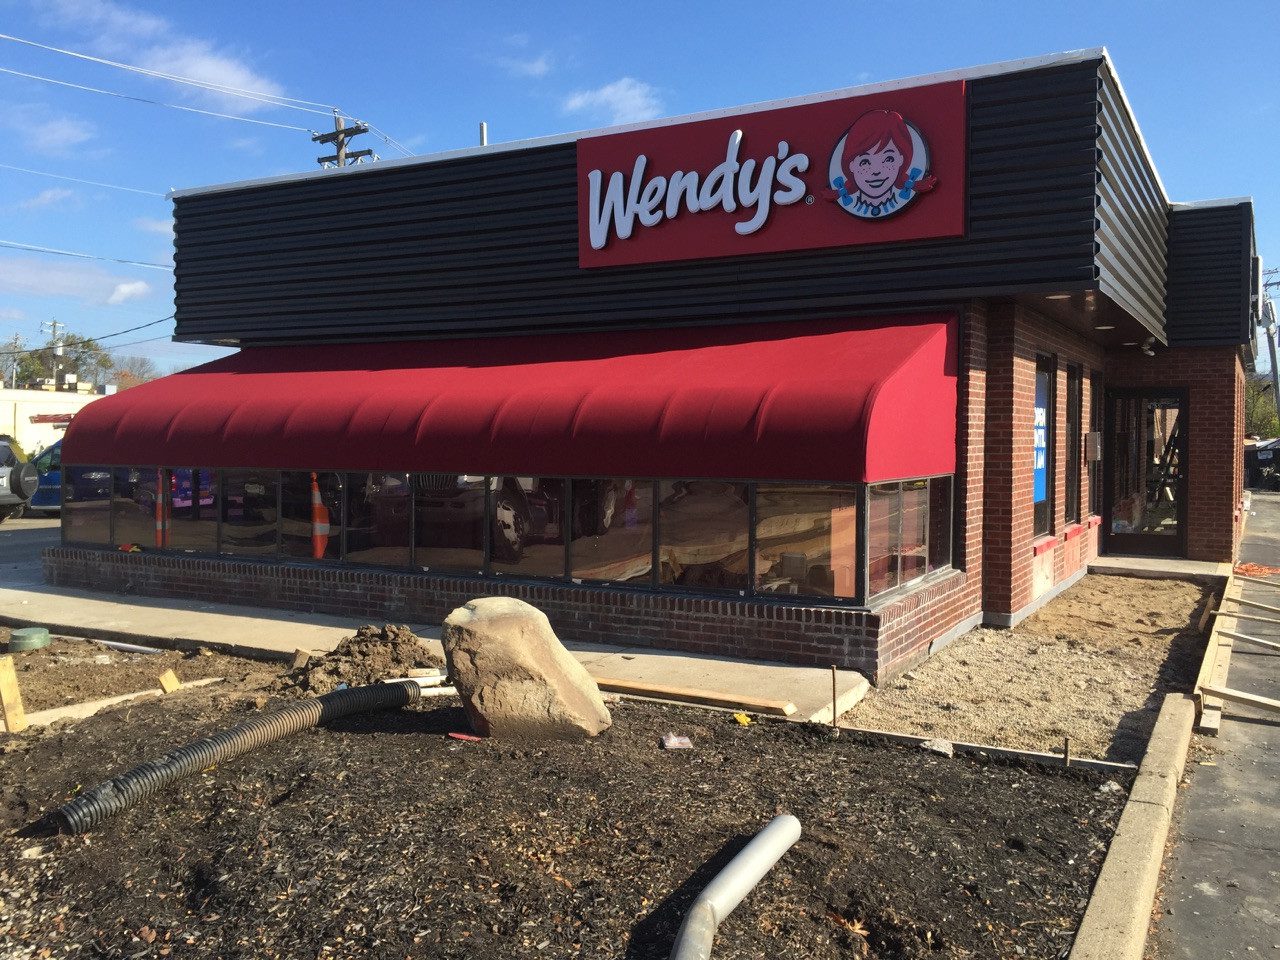 A wendy 's restaurant with a red awning and dirt.